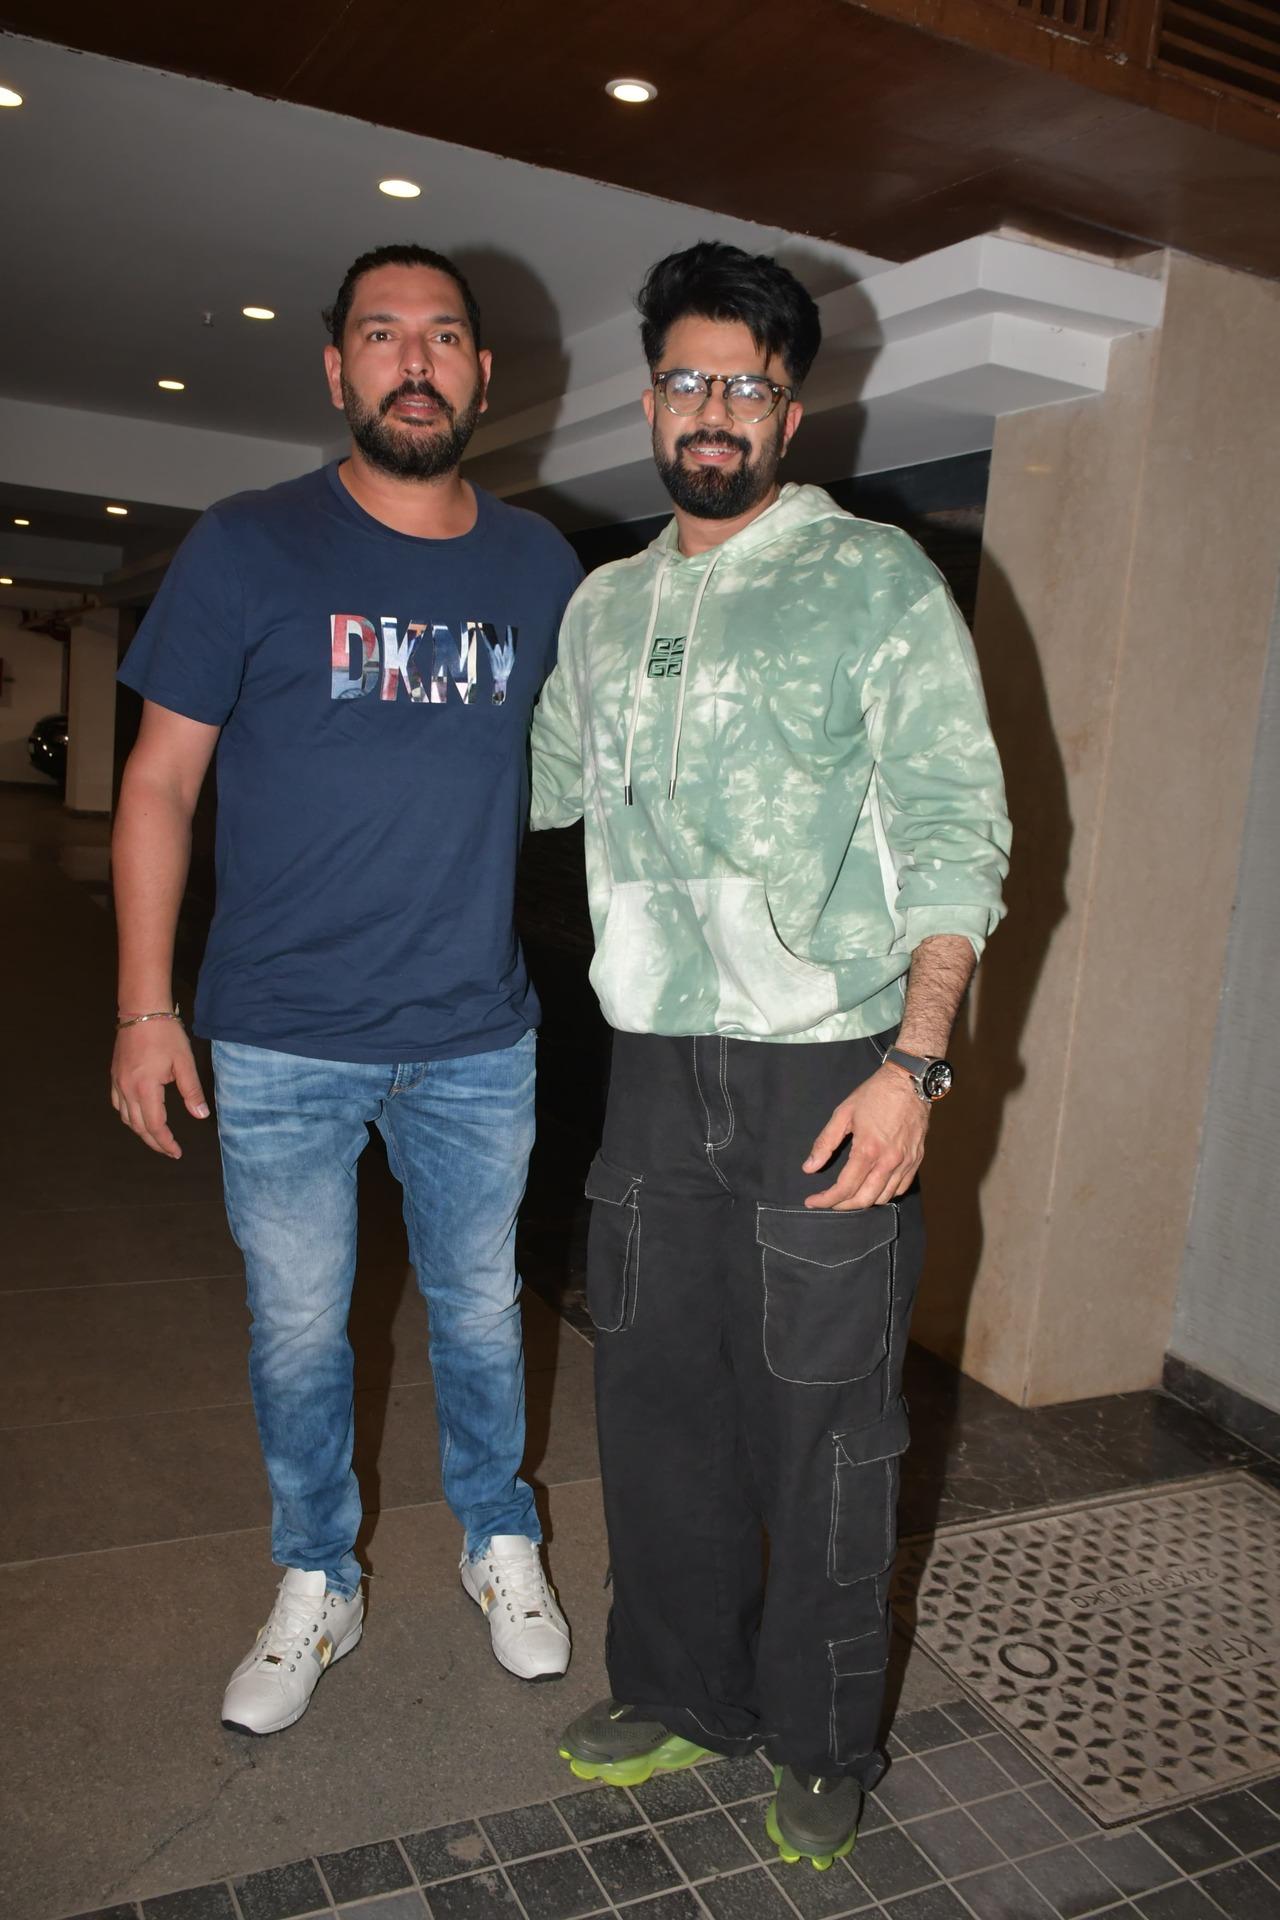 Maniesh Paul and Yuvraj Singh greeted each other like old friends as they bumped into each other outside the apartment